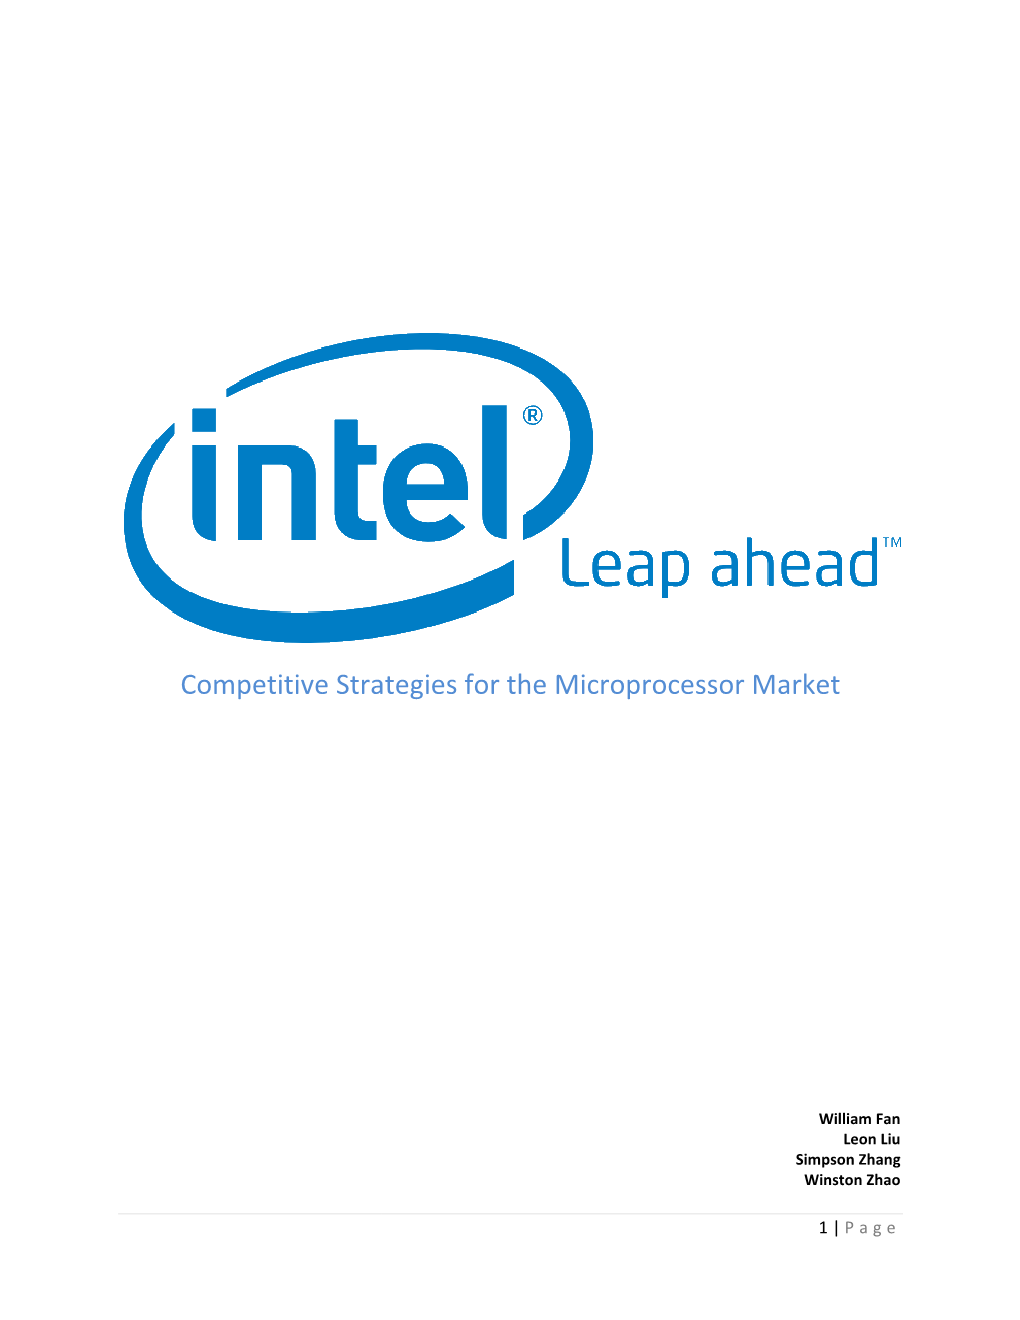 Intel Corporation, Founded 1968, Is the Largest Microprocessor Company in the World, with the Greatest Overall Share of the Microprocessor Market Worldwide